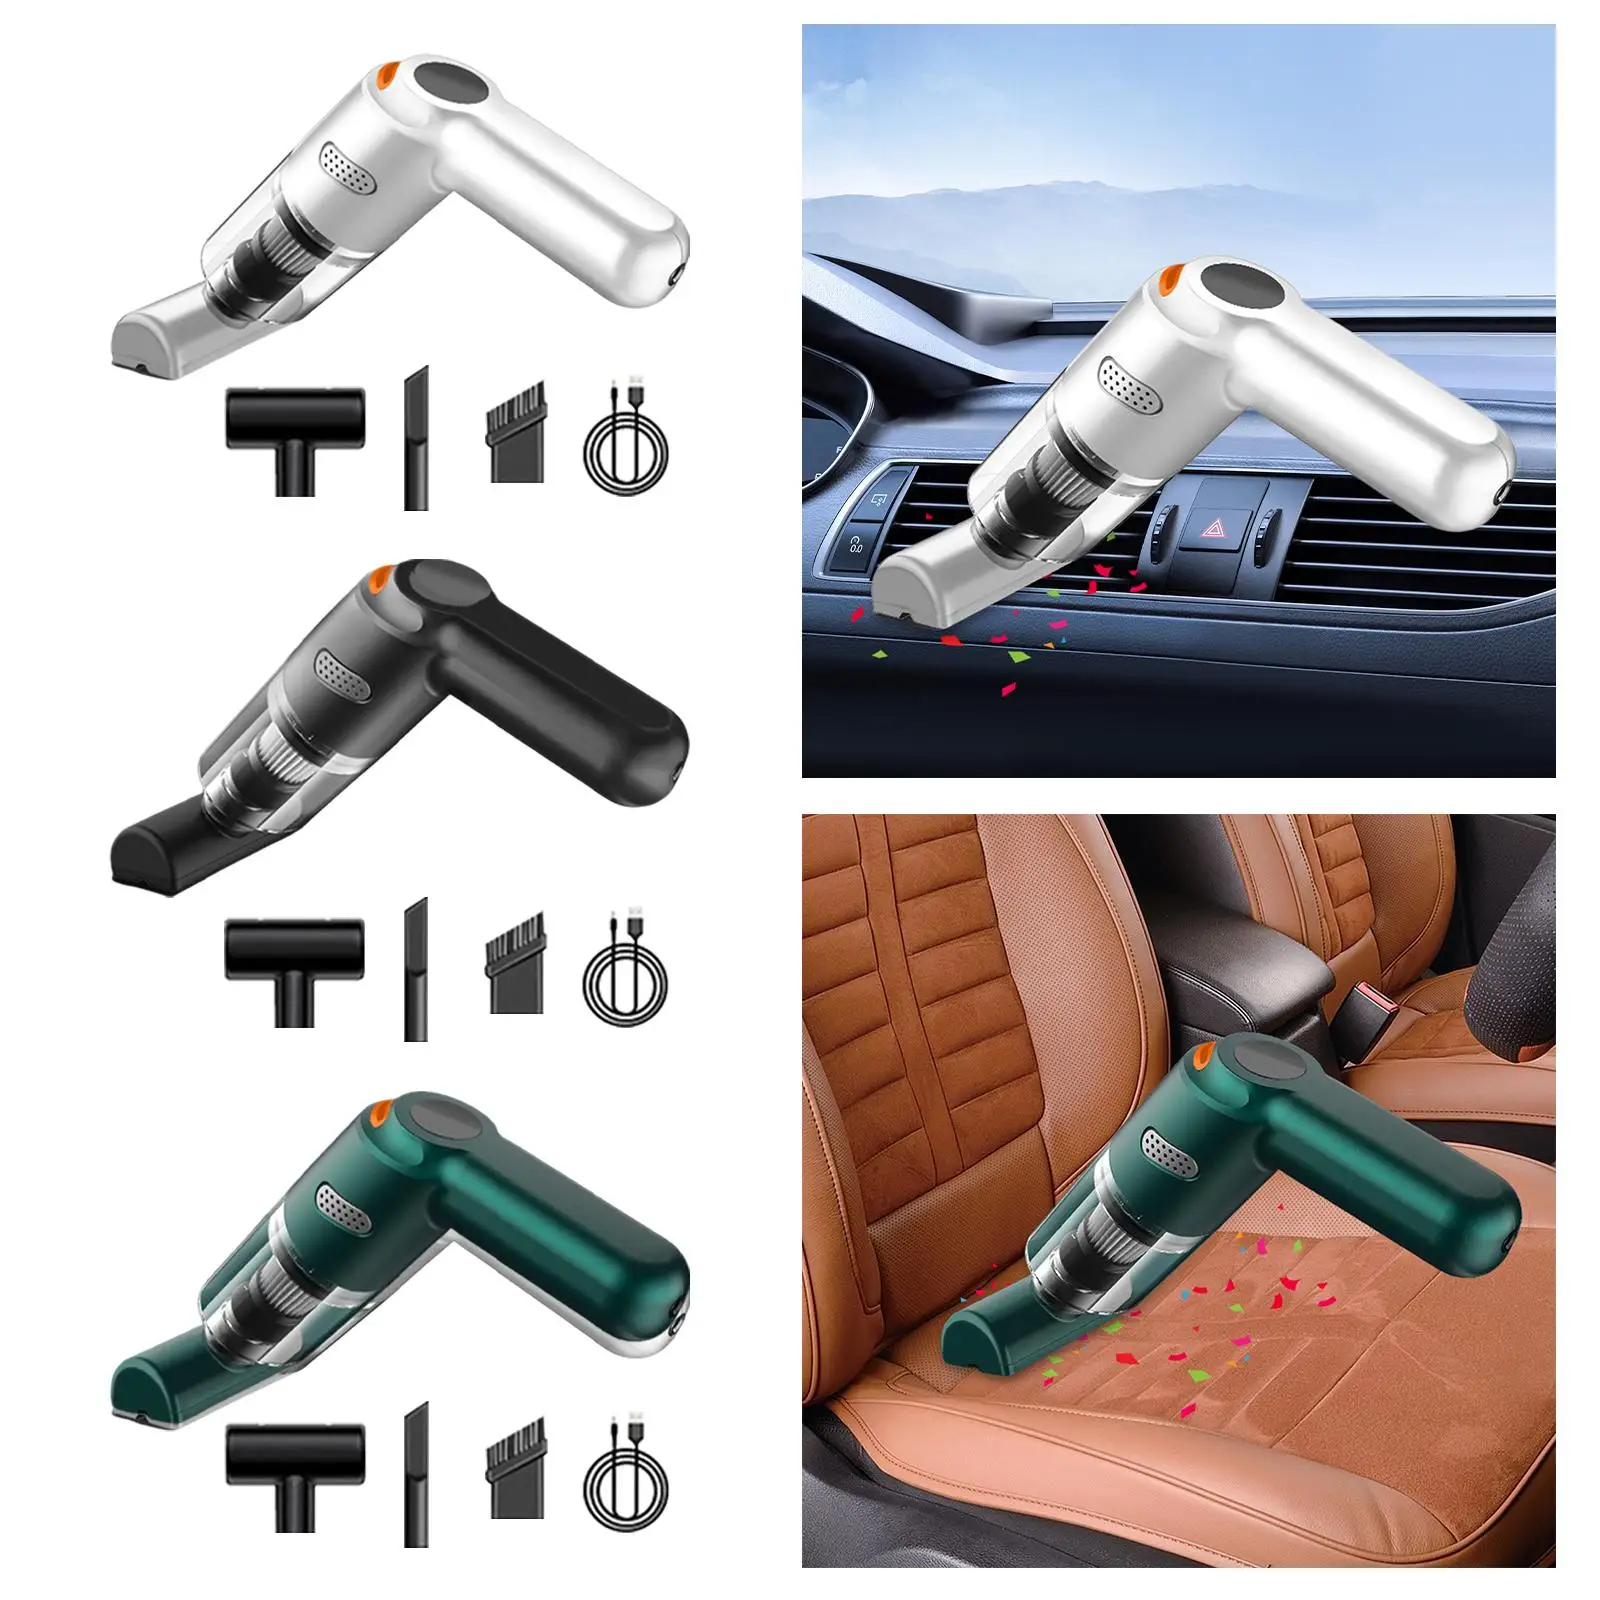 Mini Car Vacuum Cleaner Handheld Duster Portable USB Charging 120W High Power Suction Cordless for car home Dust Collection